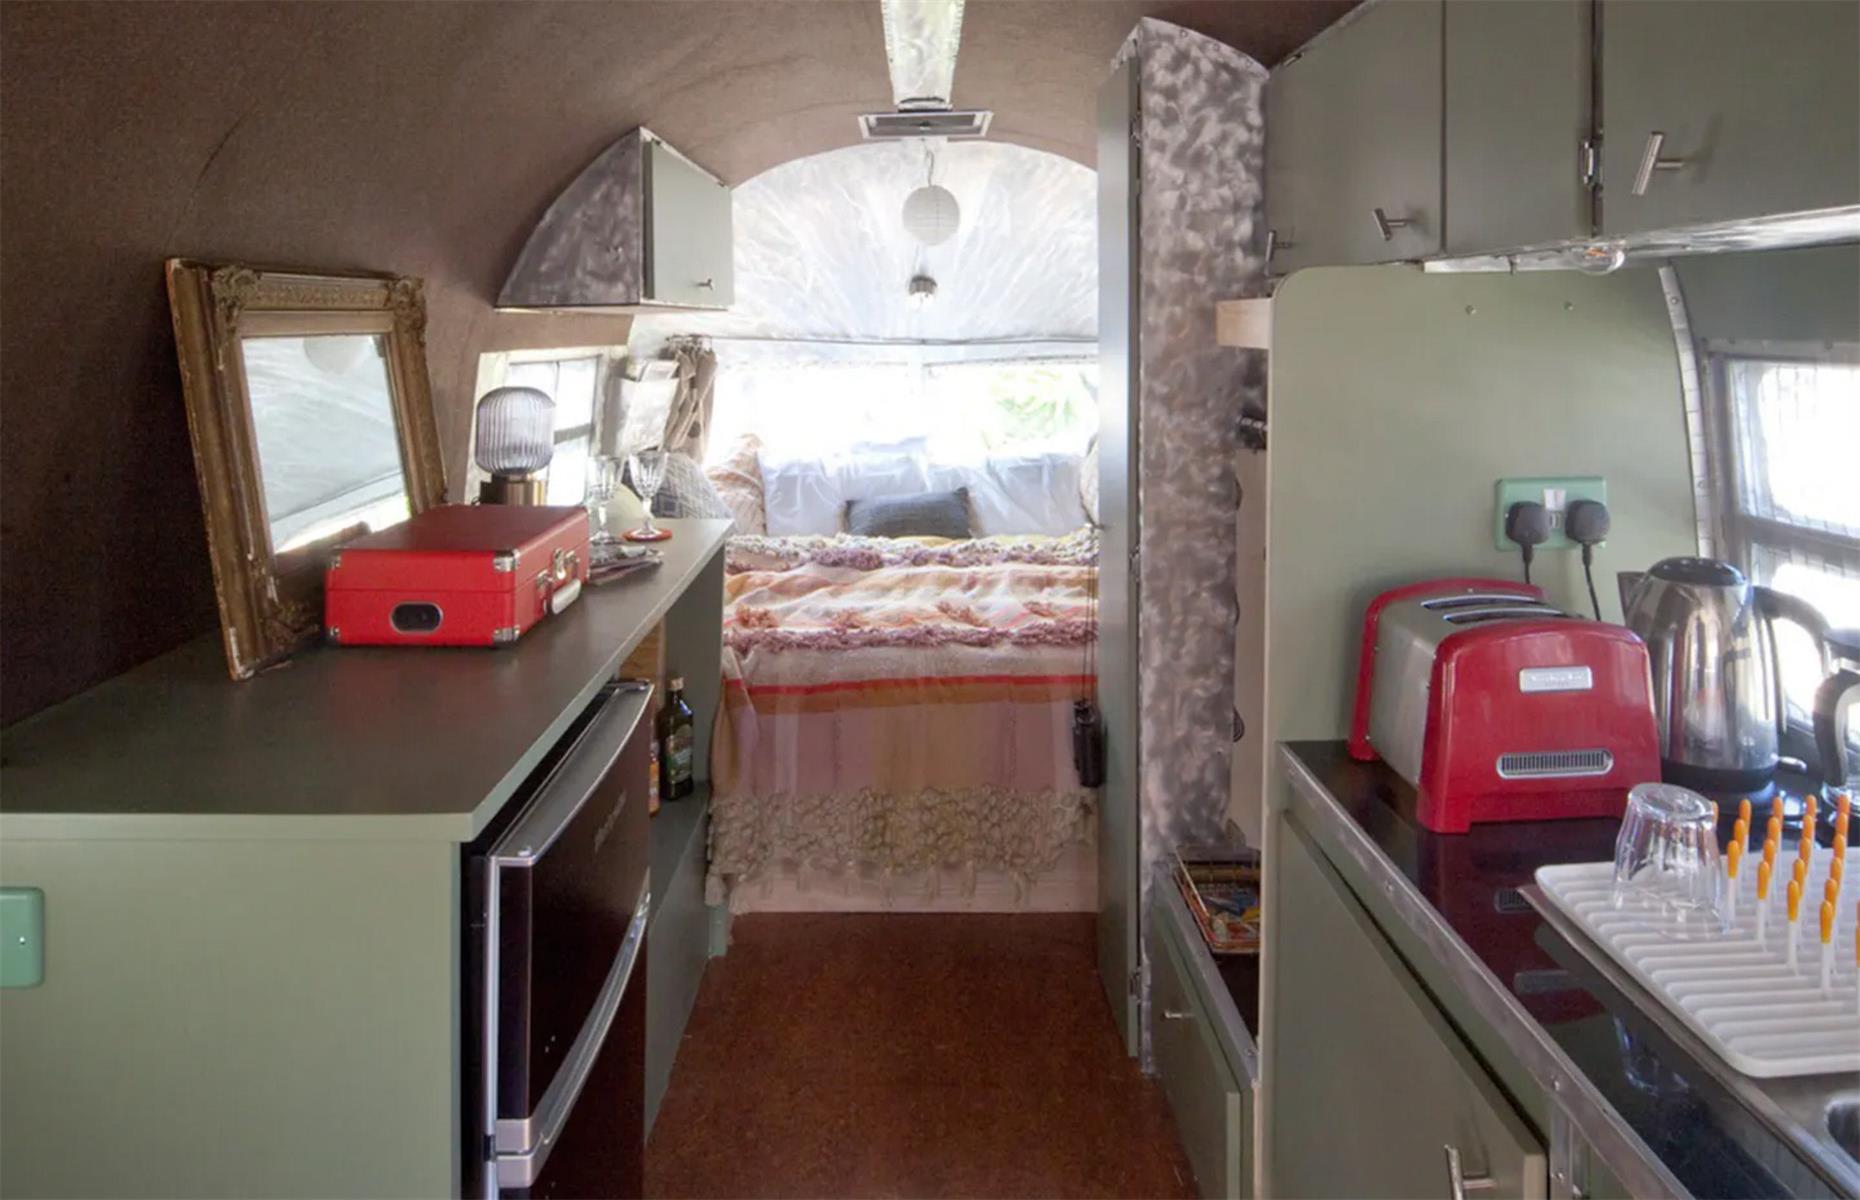 <p>Sales of the Clipper went through the roof, despite the trailer's hefty $1,200 price tag – a lot of money in Depression-era America, the equivalent of around $25,560 today.</p>  <p>While this <a href="http://www.airbnb.co.uk/rooms/590396573709375105">Airbnb</a> showcases a well-preserved 1950s interior, its predecessor, the 1936 model, was similarly designed to be cozy and comfortable, with leather seating, solid cabinetry and a cocoon-like ceiling.</p>